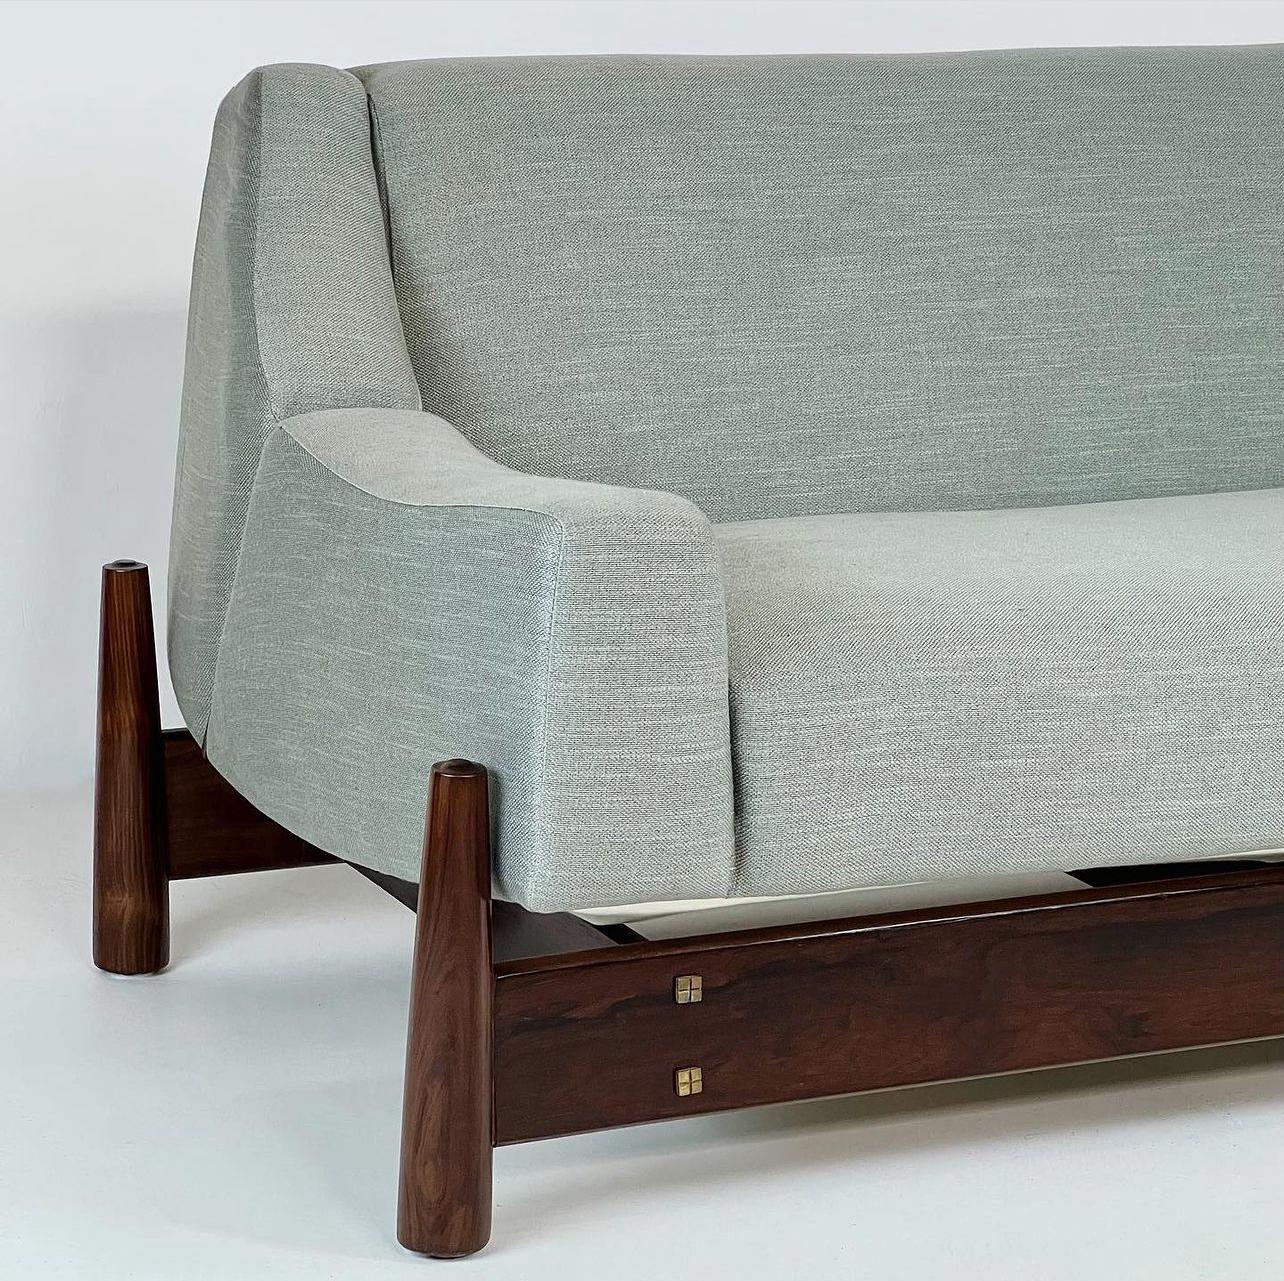 Brazilian Cimo S/A Sofa from the 60s, Brazil, structure in Jacaranda For Sale